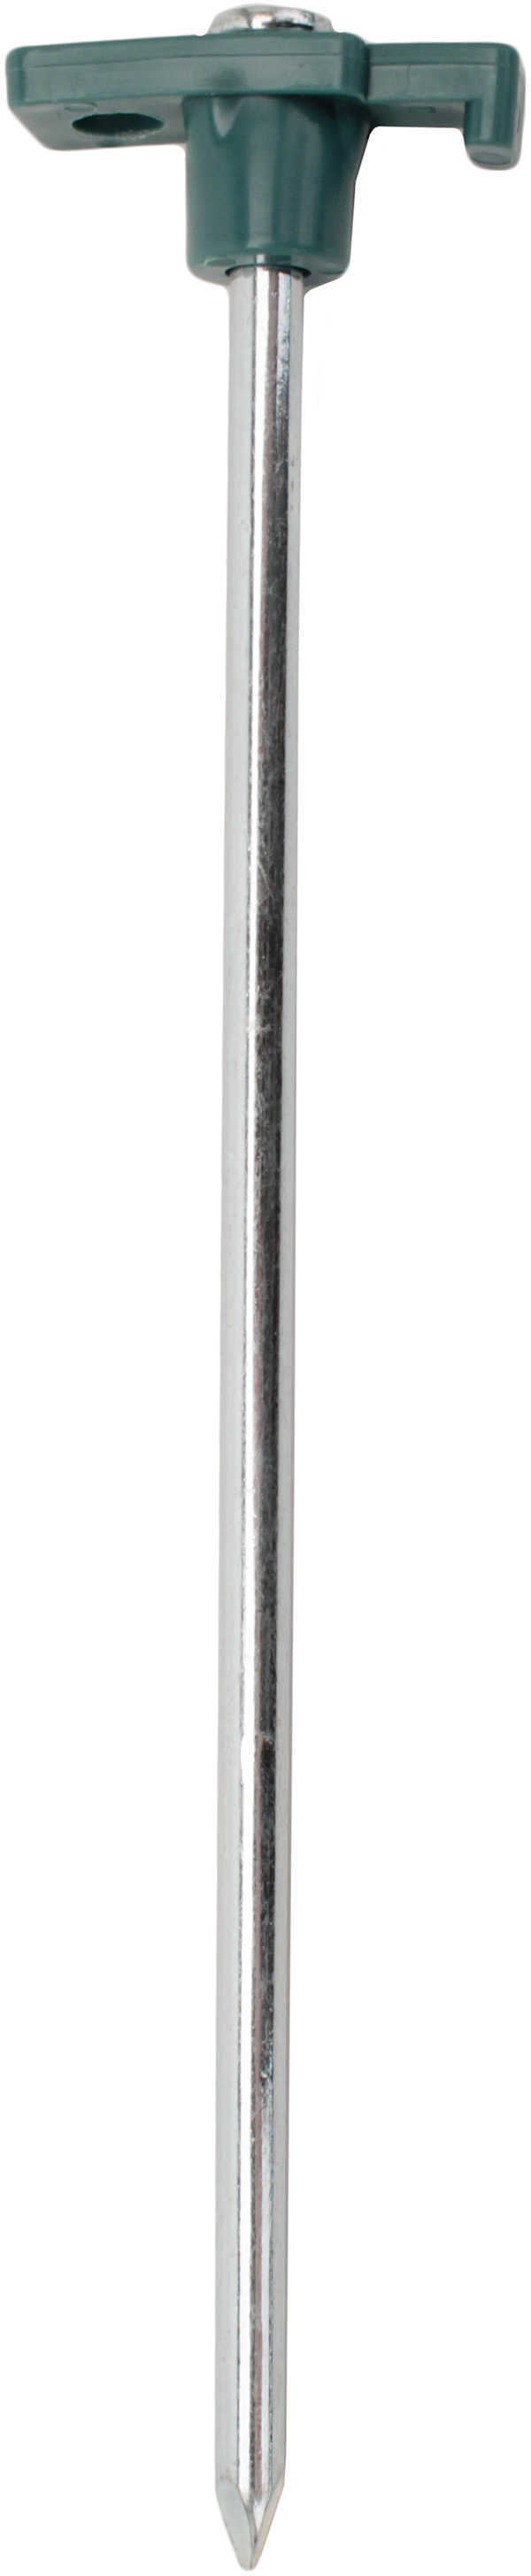 Coleman Tent Stakes/Pegs Steel Md: 2000016444